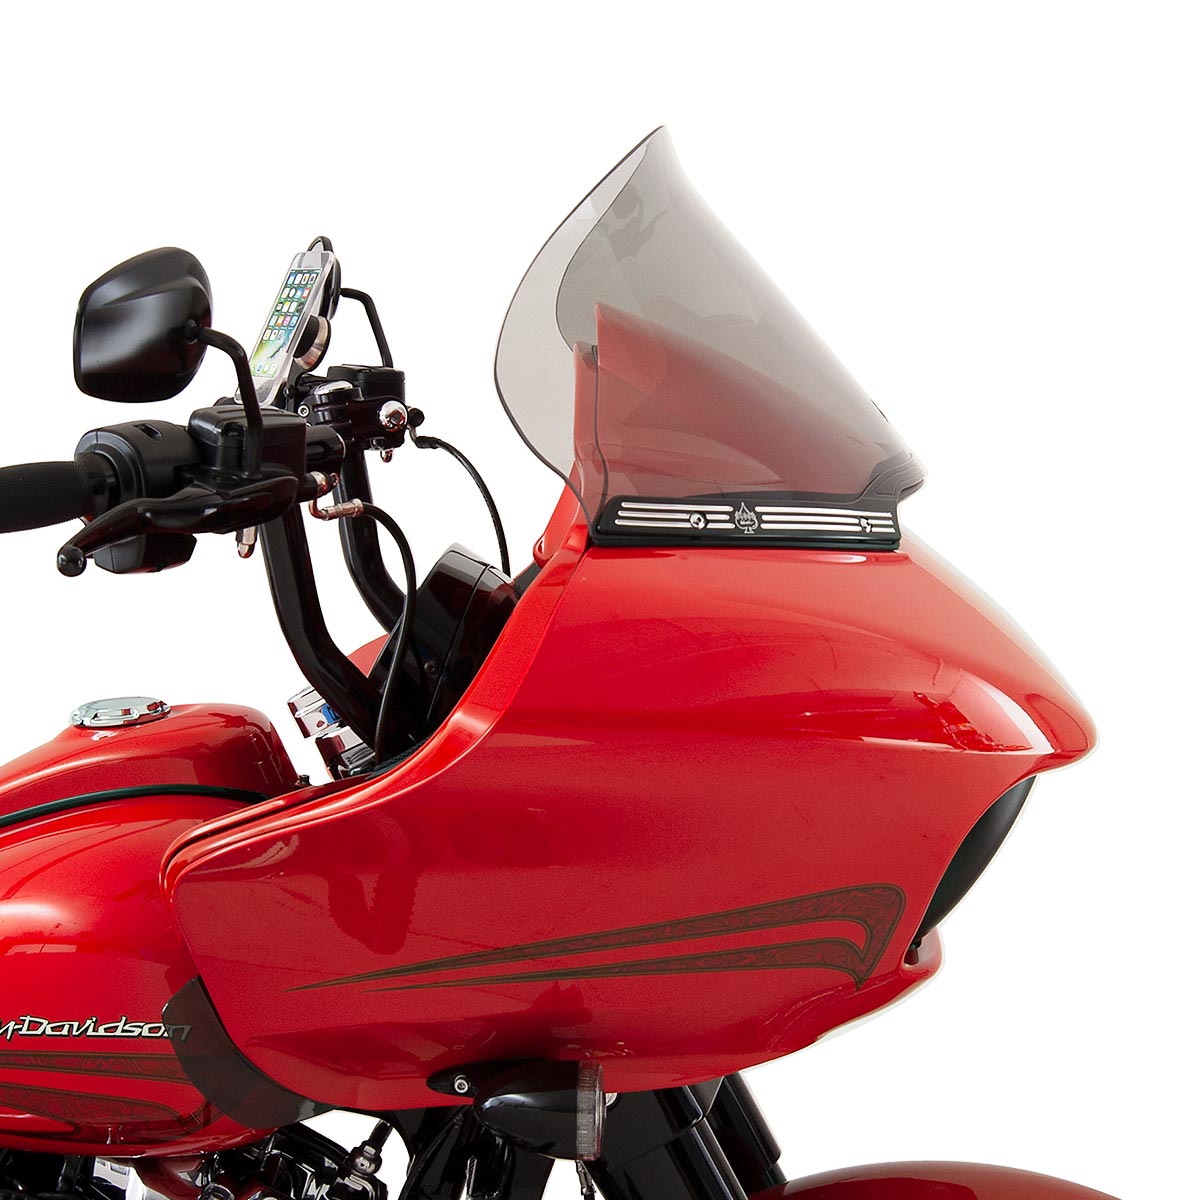 12" Pro-Touring Tint Flare™ Windshields for Harley-Davidson 2015-2024 Road Glide motorcycle models(12" Pro-Touring - Tint)